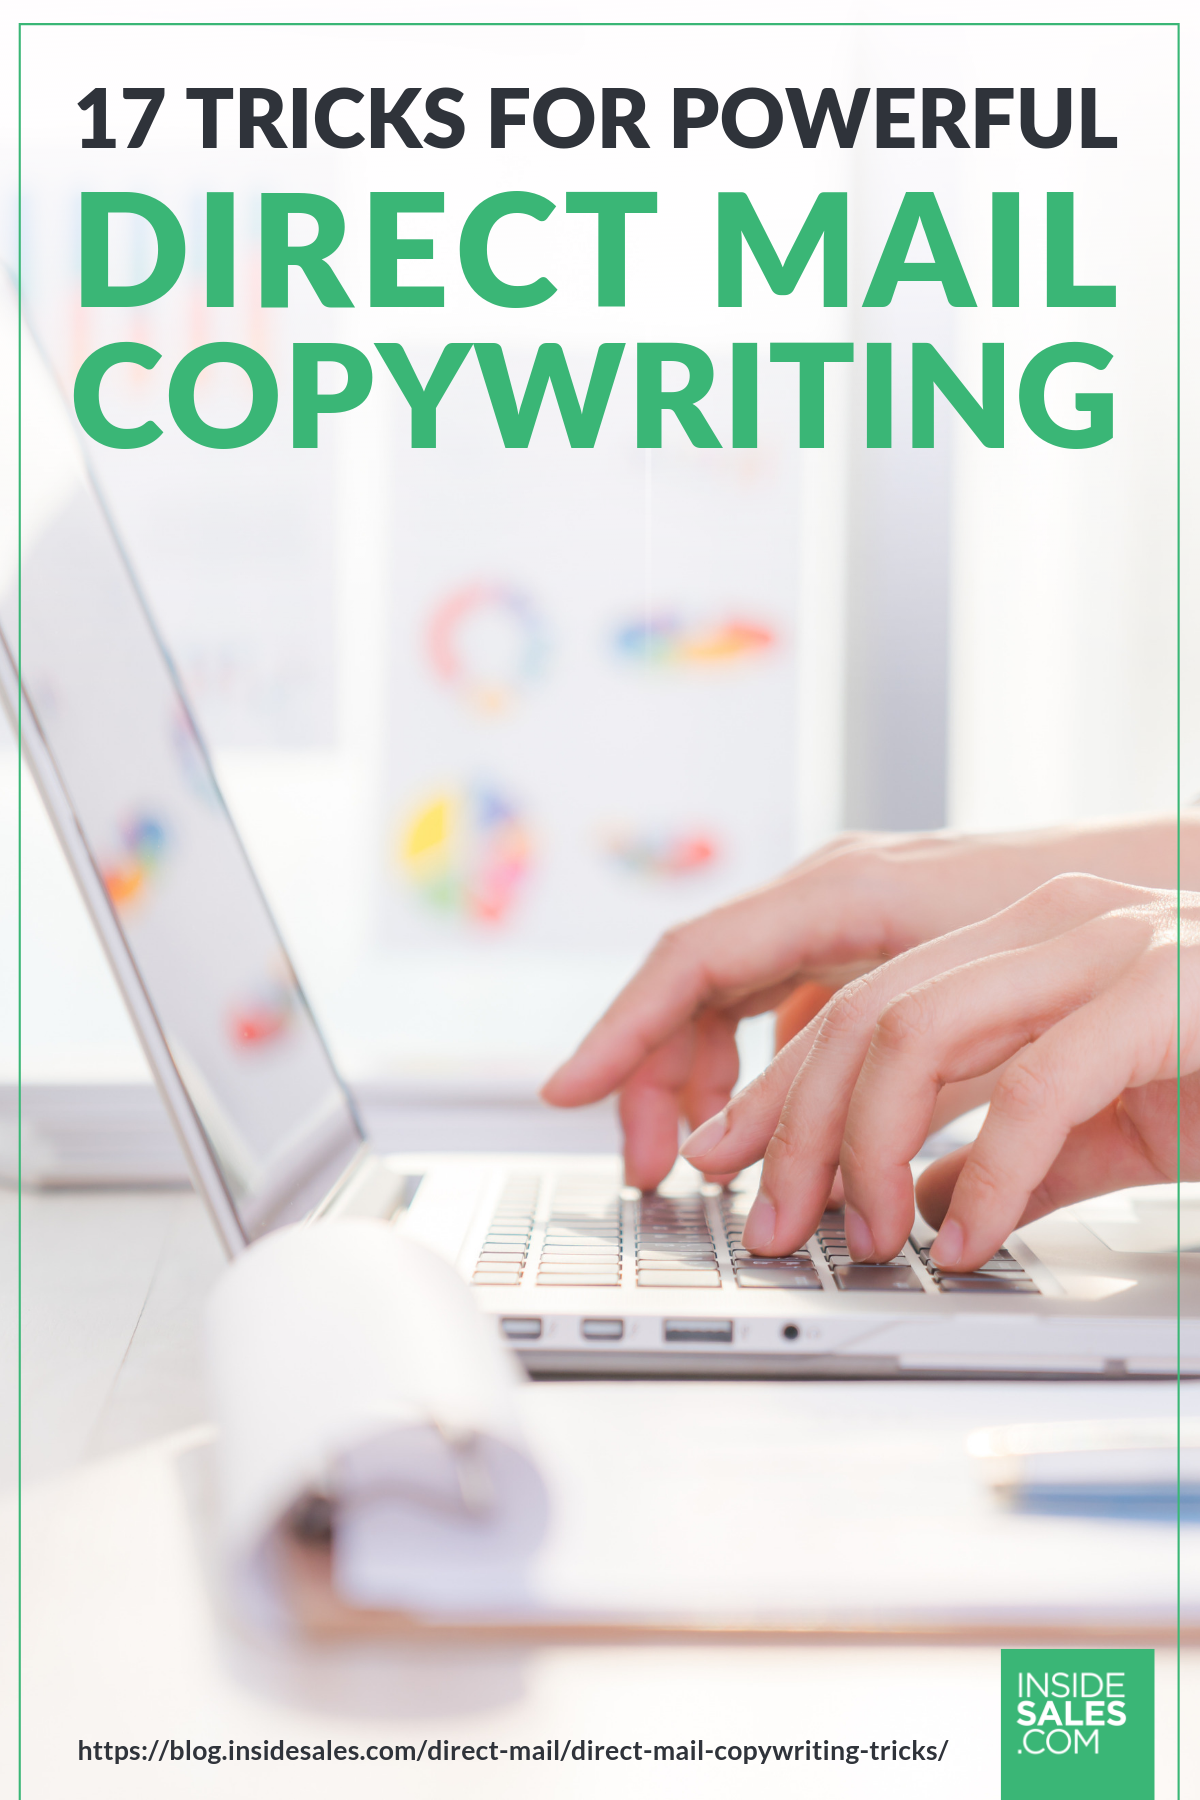 17 Tricks For Powerful Direct Mail Copywriting https://resources.insidesales.com/blog/direct-mail/direct-mail-copywriting-tricks/